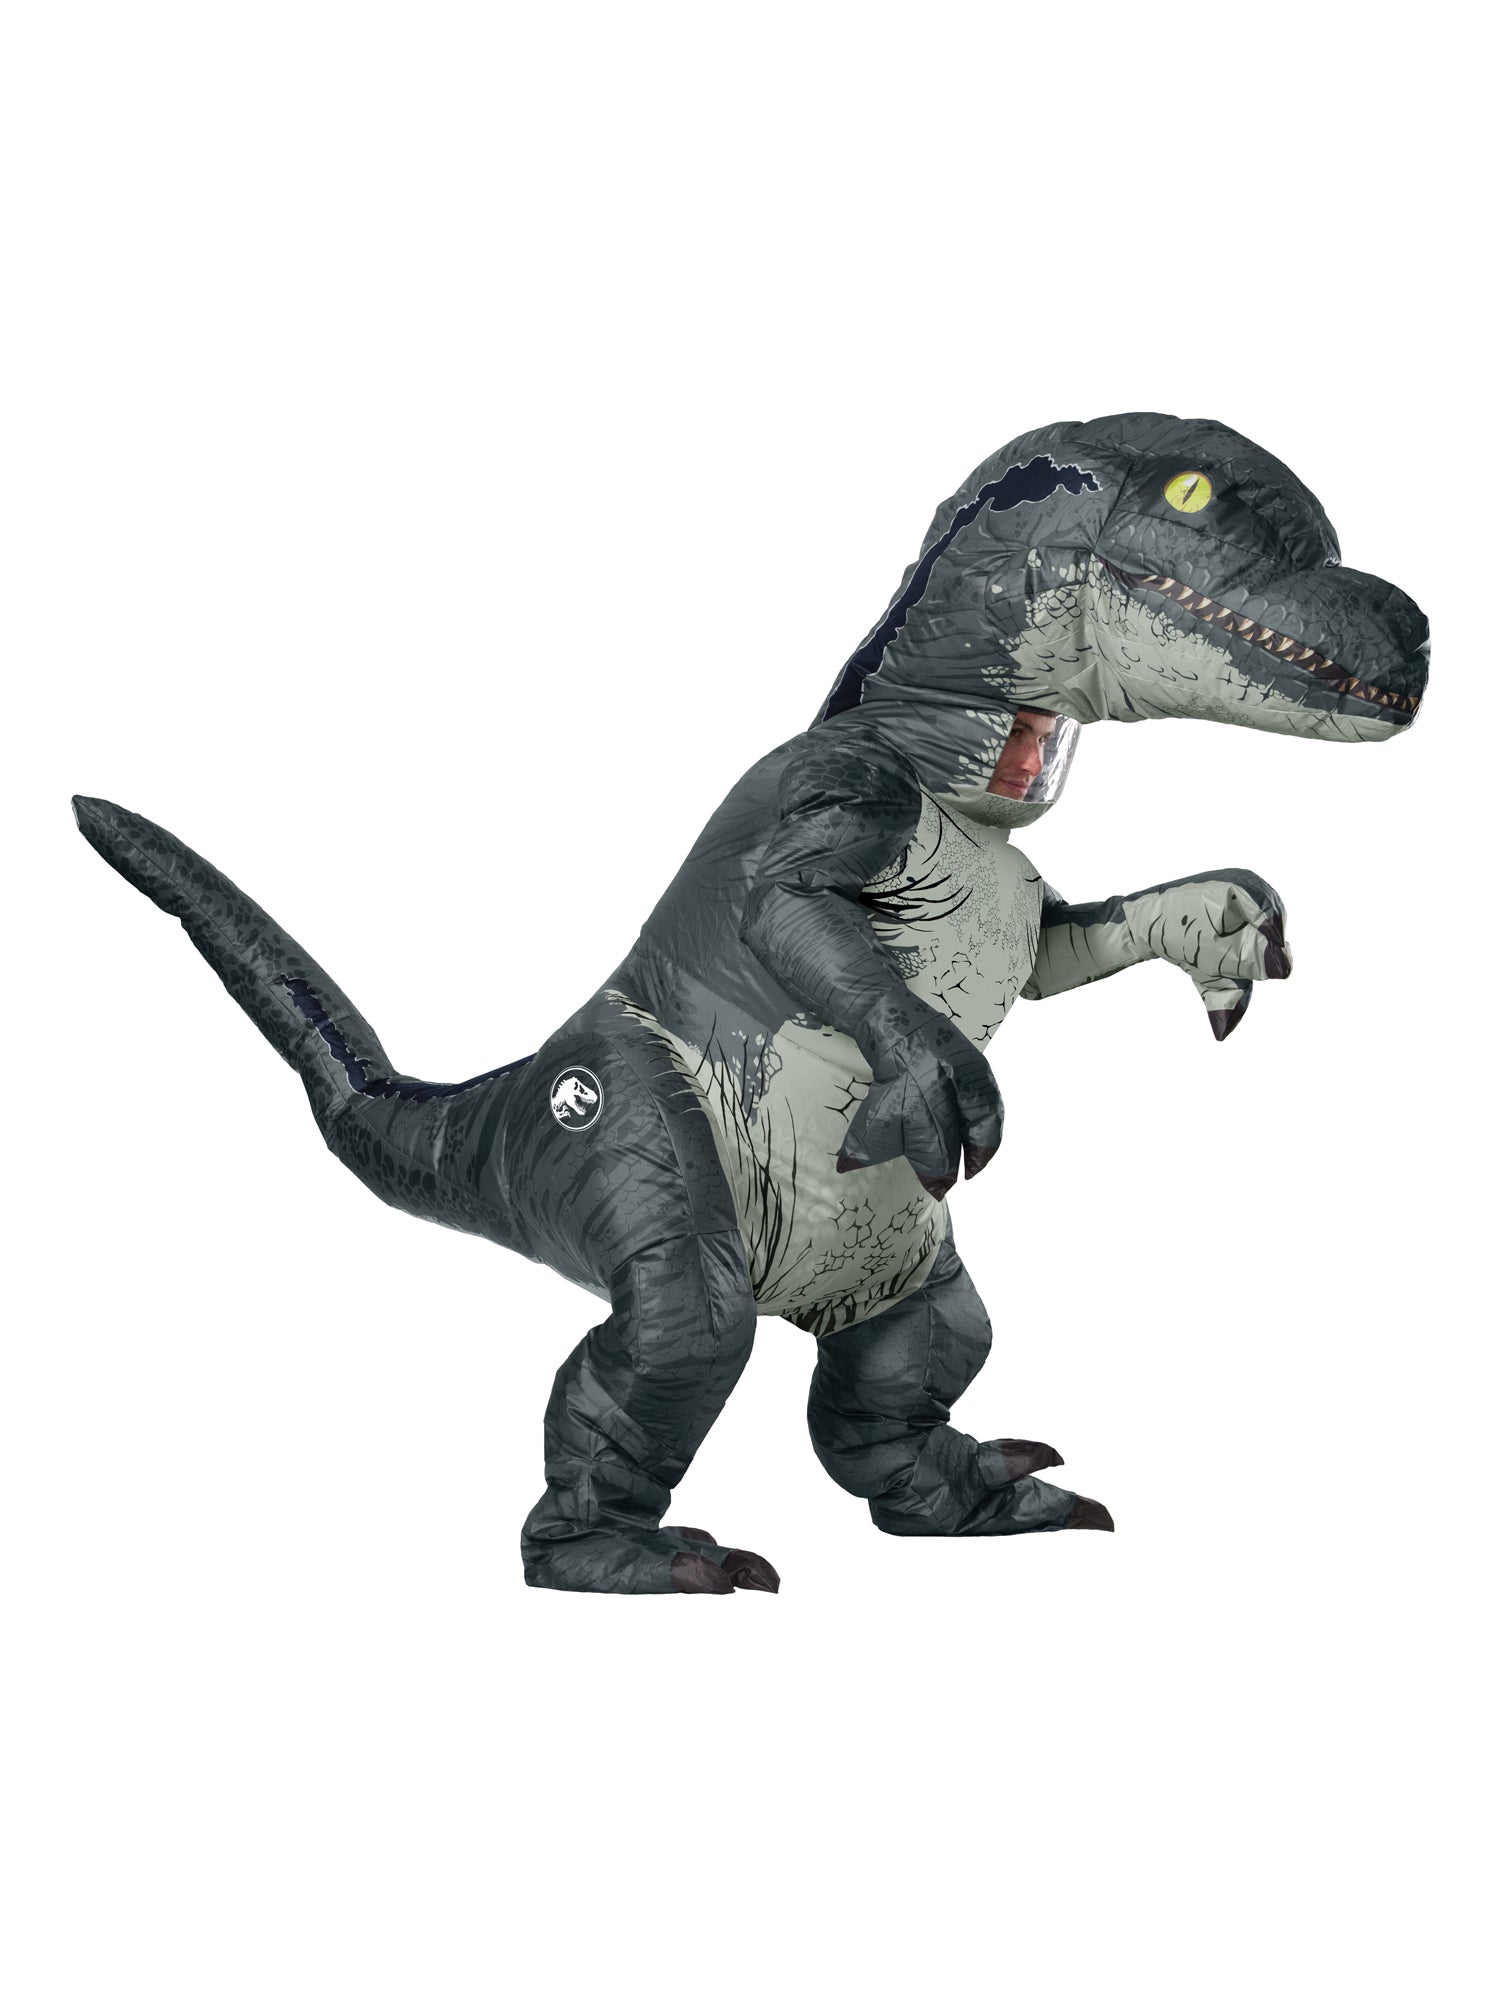 Blue, Multi, Jurassic World, Adult Costume, One Size, Front